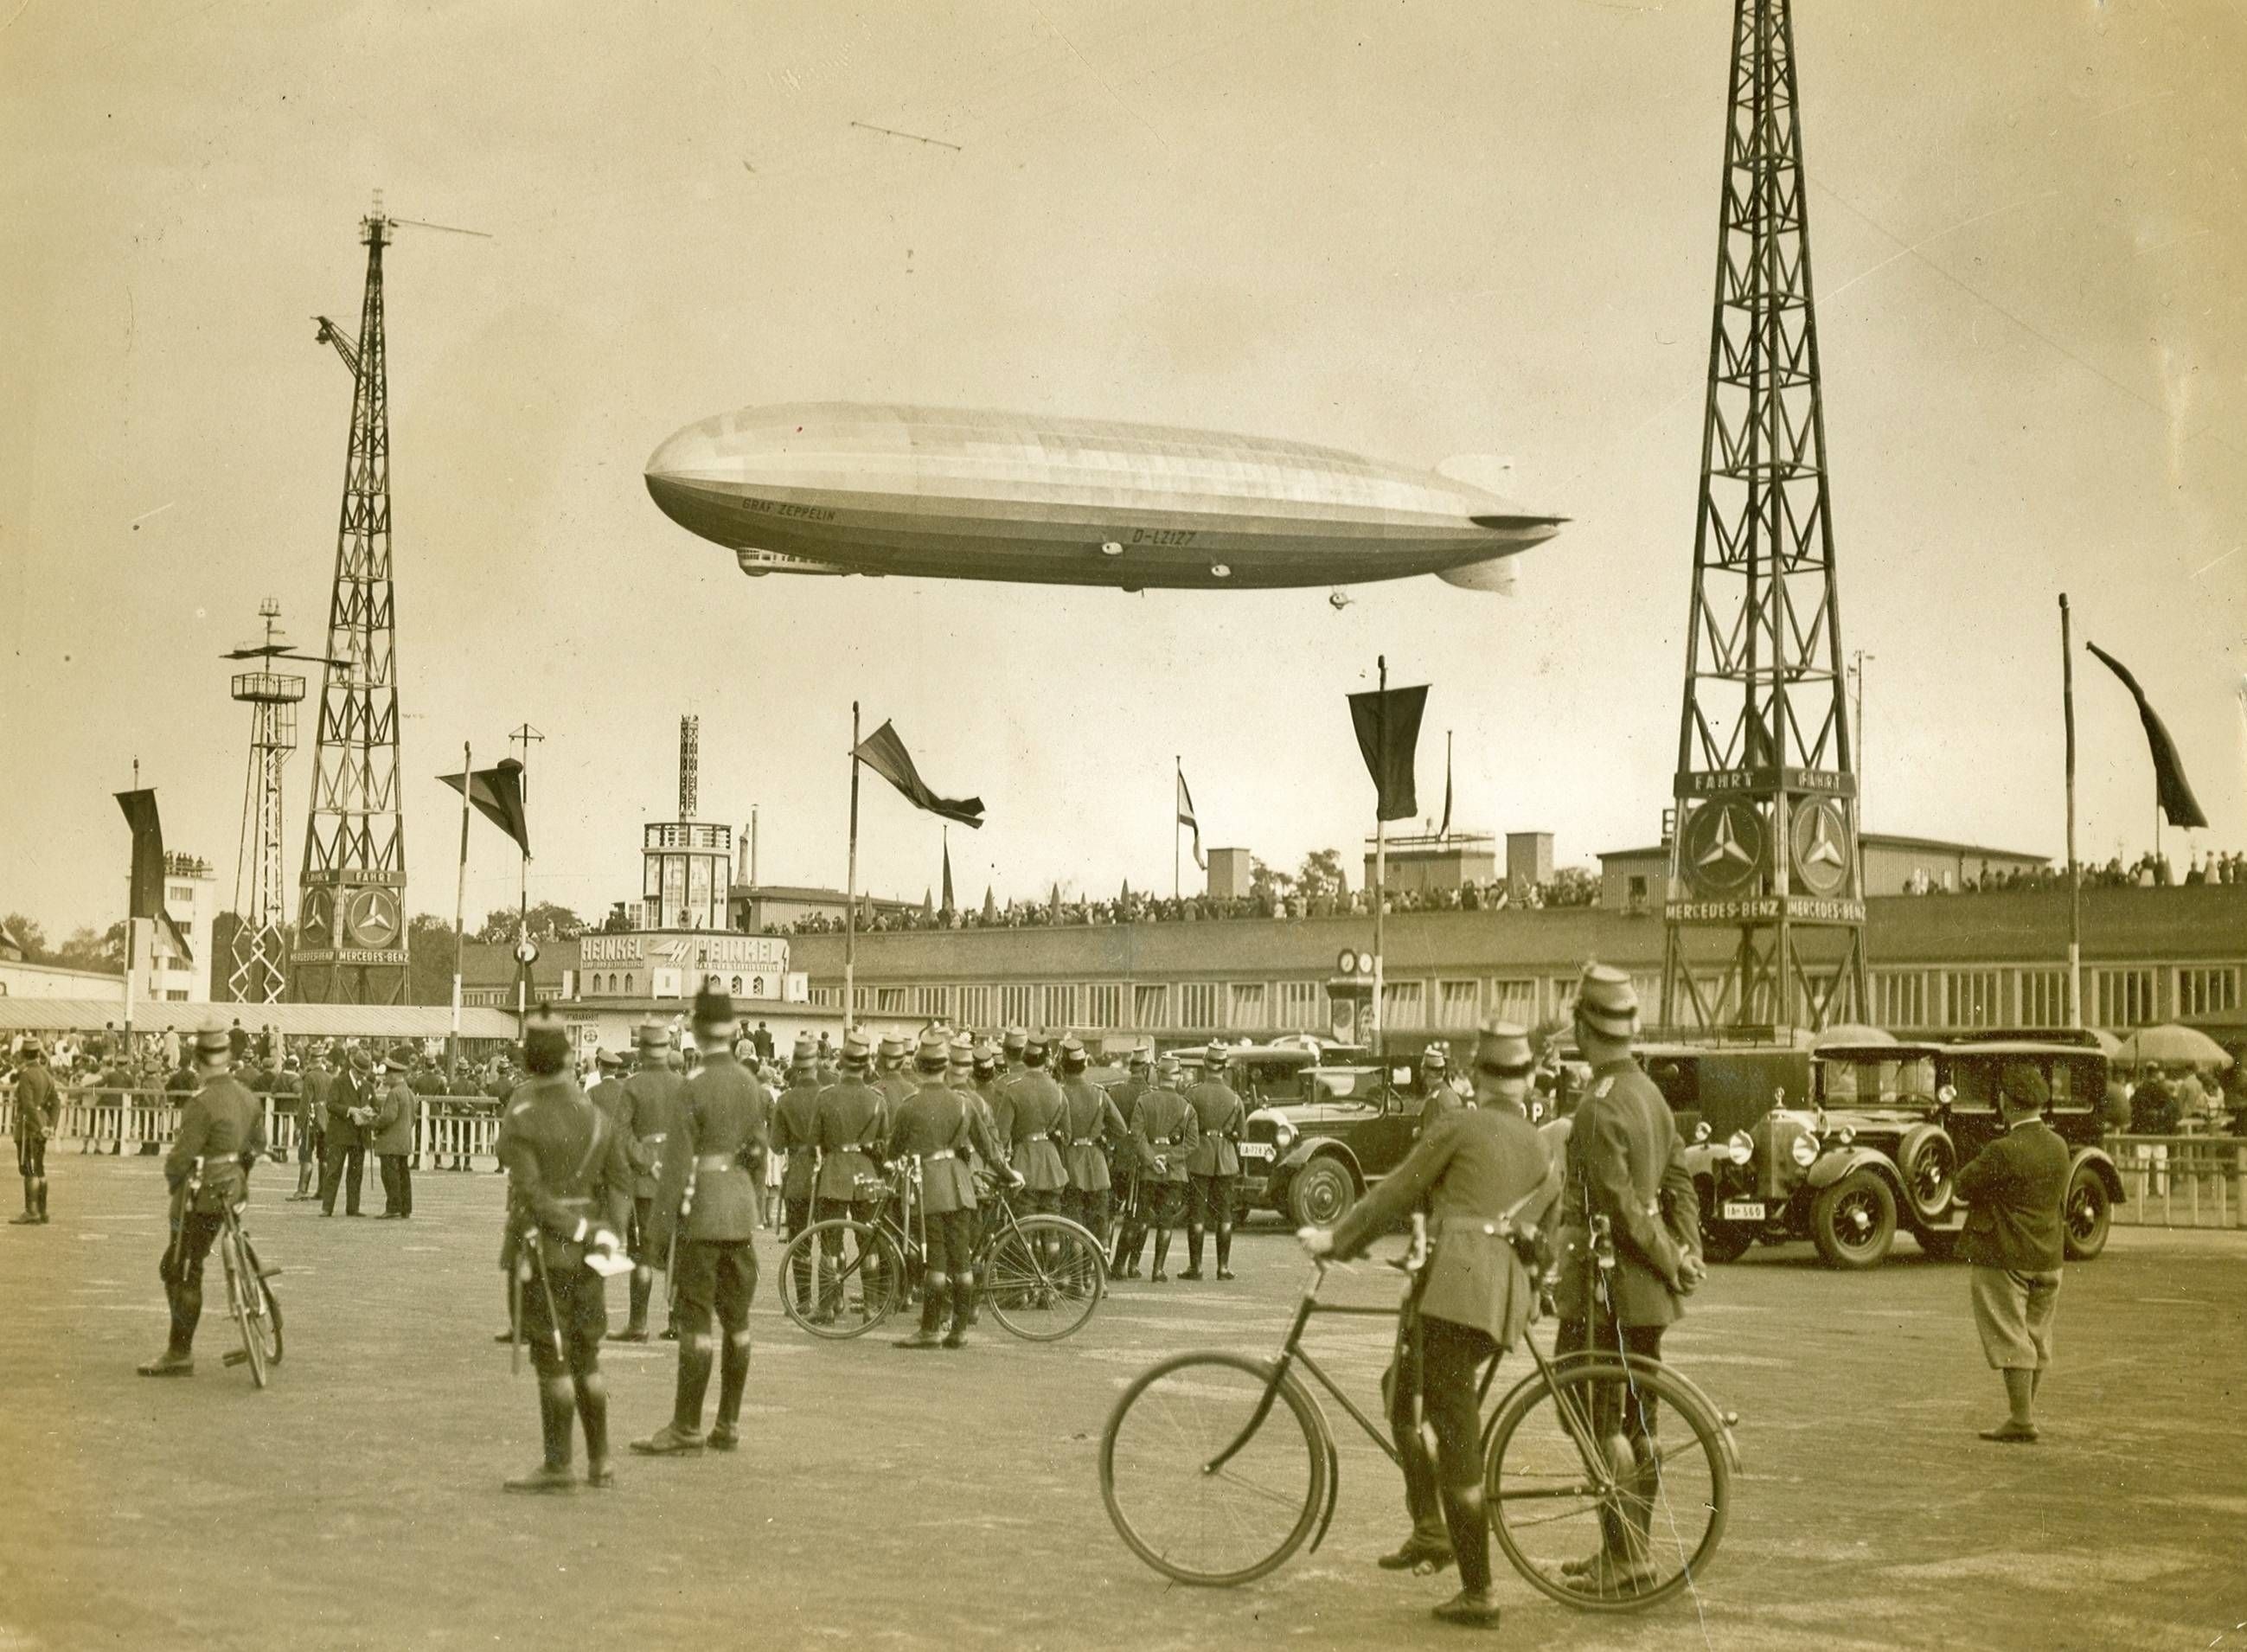 Dirigible: Zeppelin, A non-rigid airship—without any internal structure. 2600x1910 HD Wallpaper.